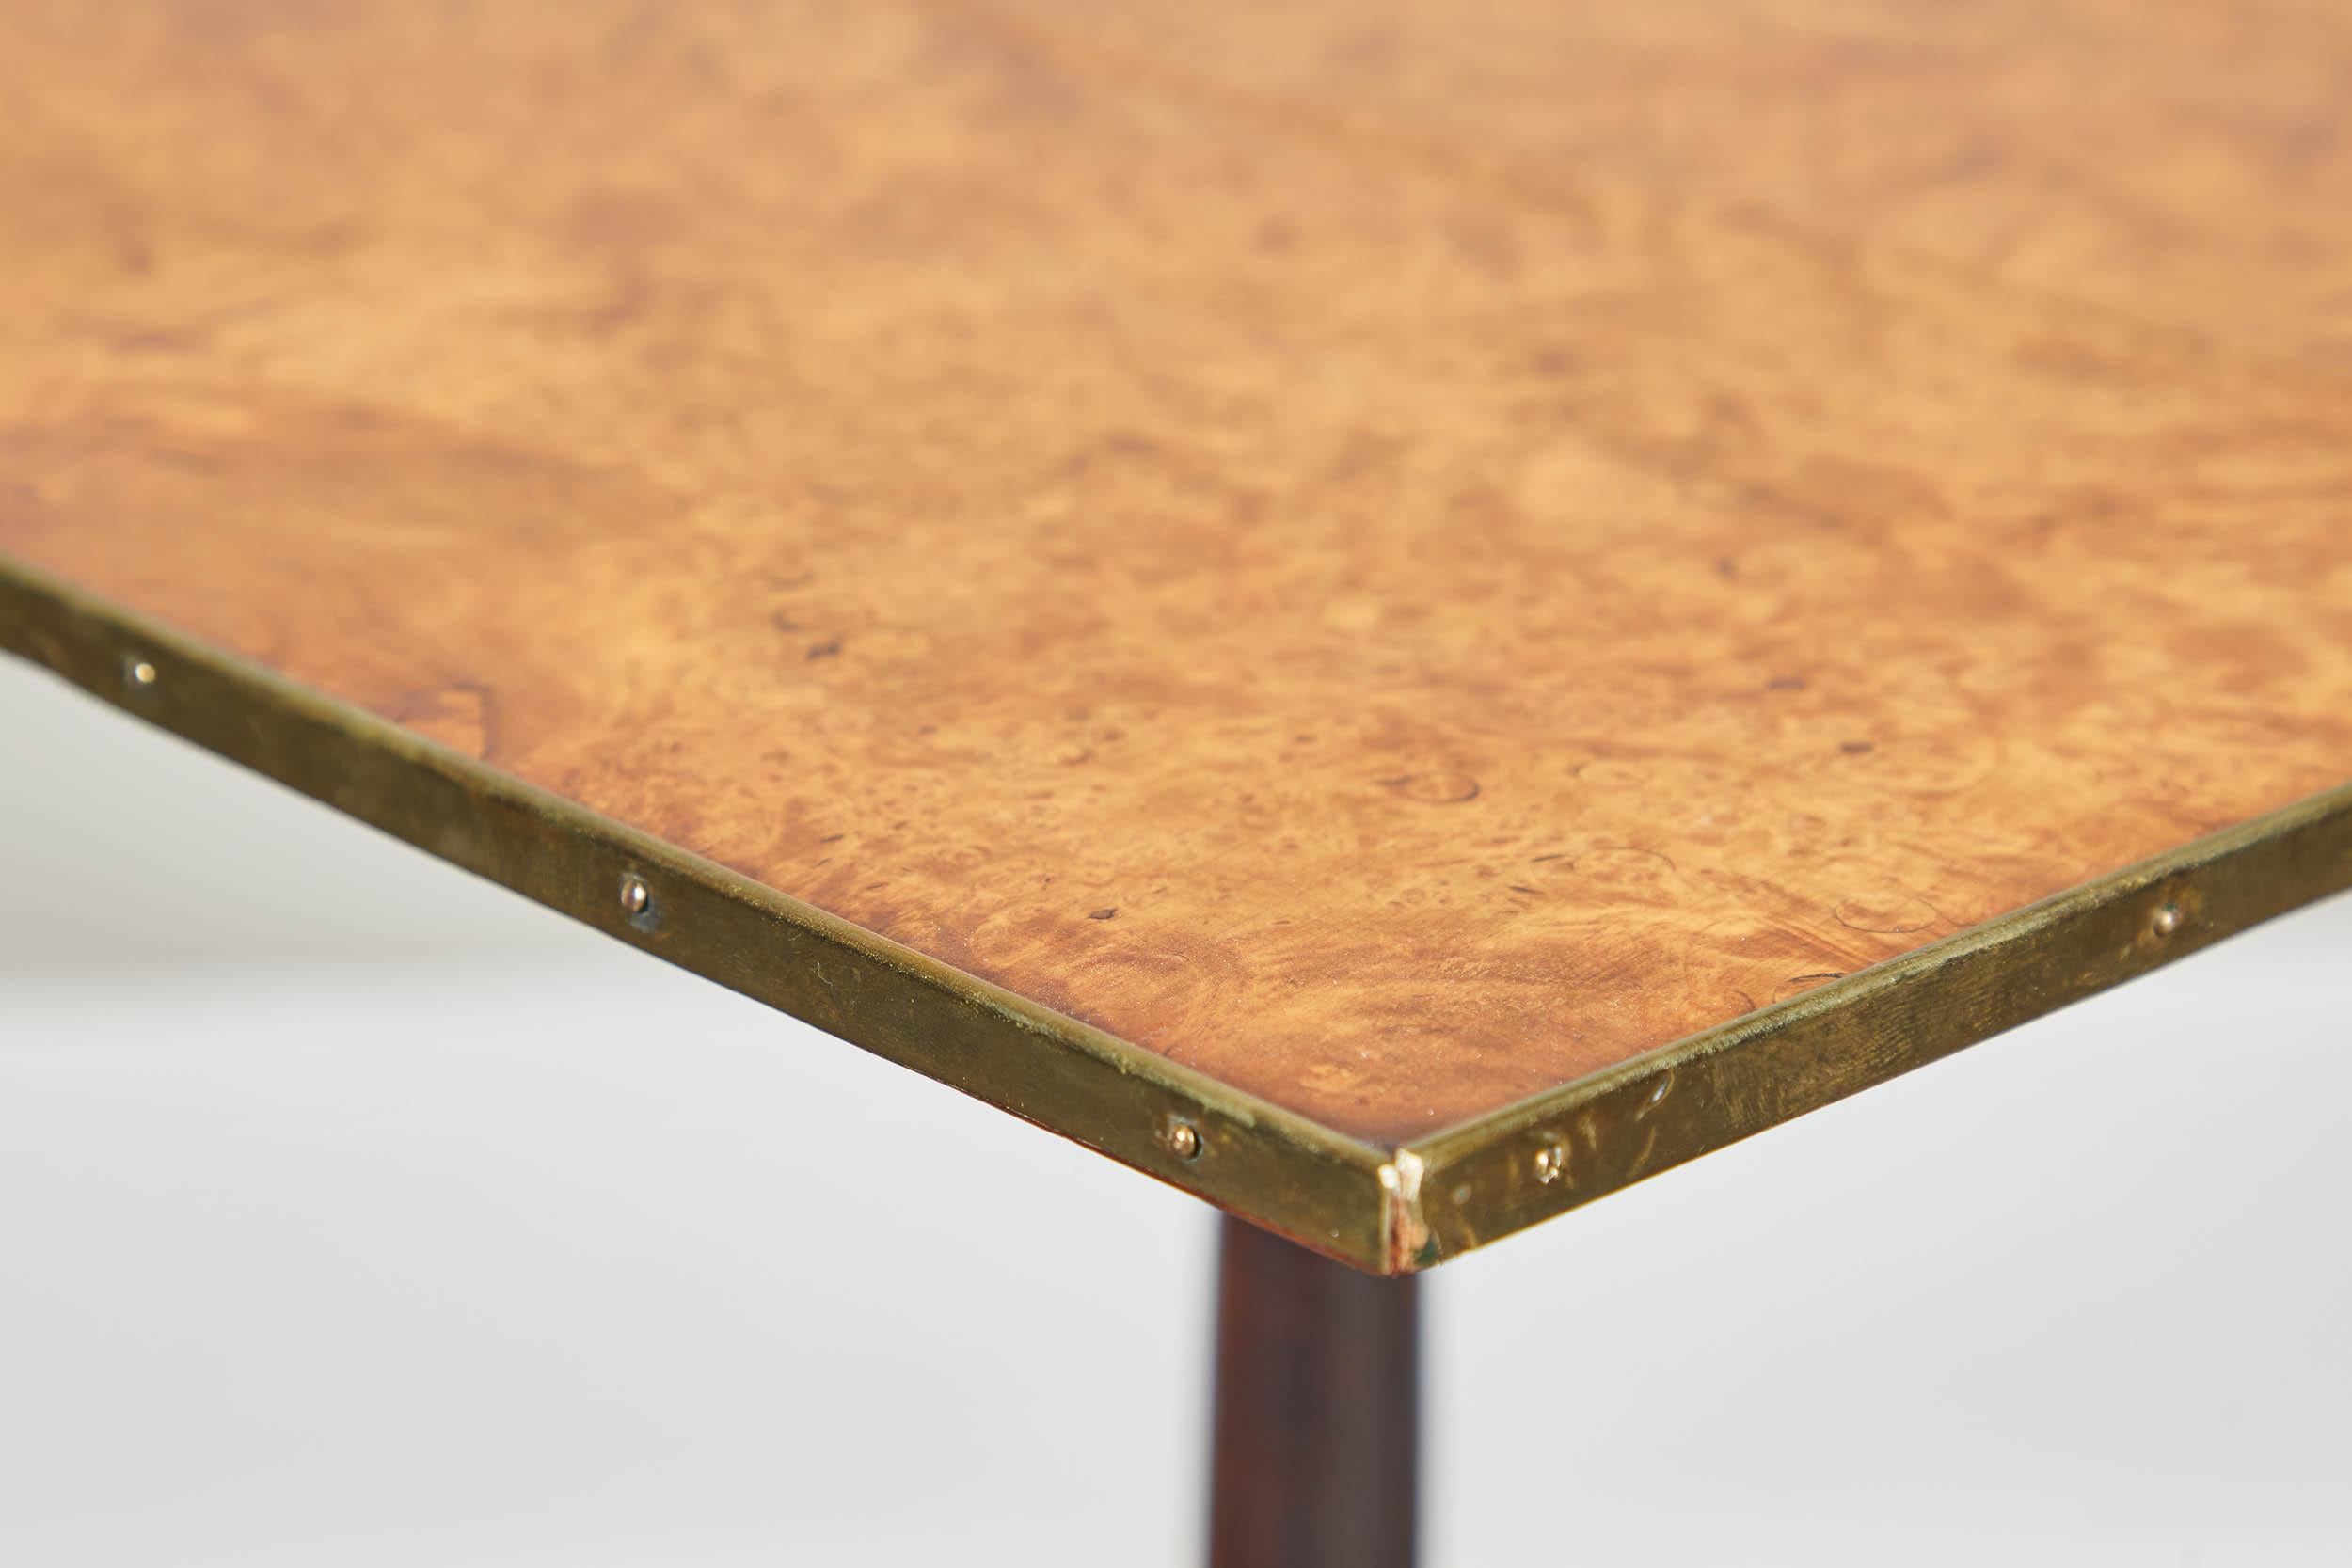 A pair of early 19th century Swedish pedestal tilt-top side tables. Brass trim detailing around table tops. Charming pieces with great functionality. Appears to have birch wood tops.